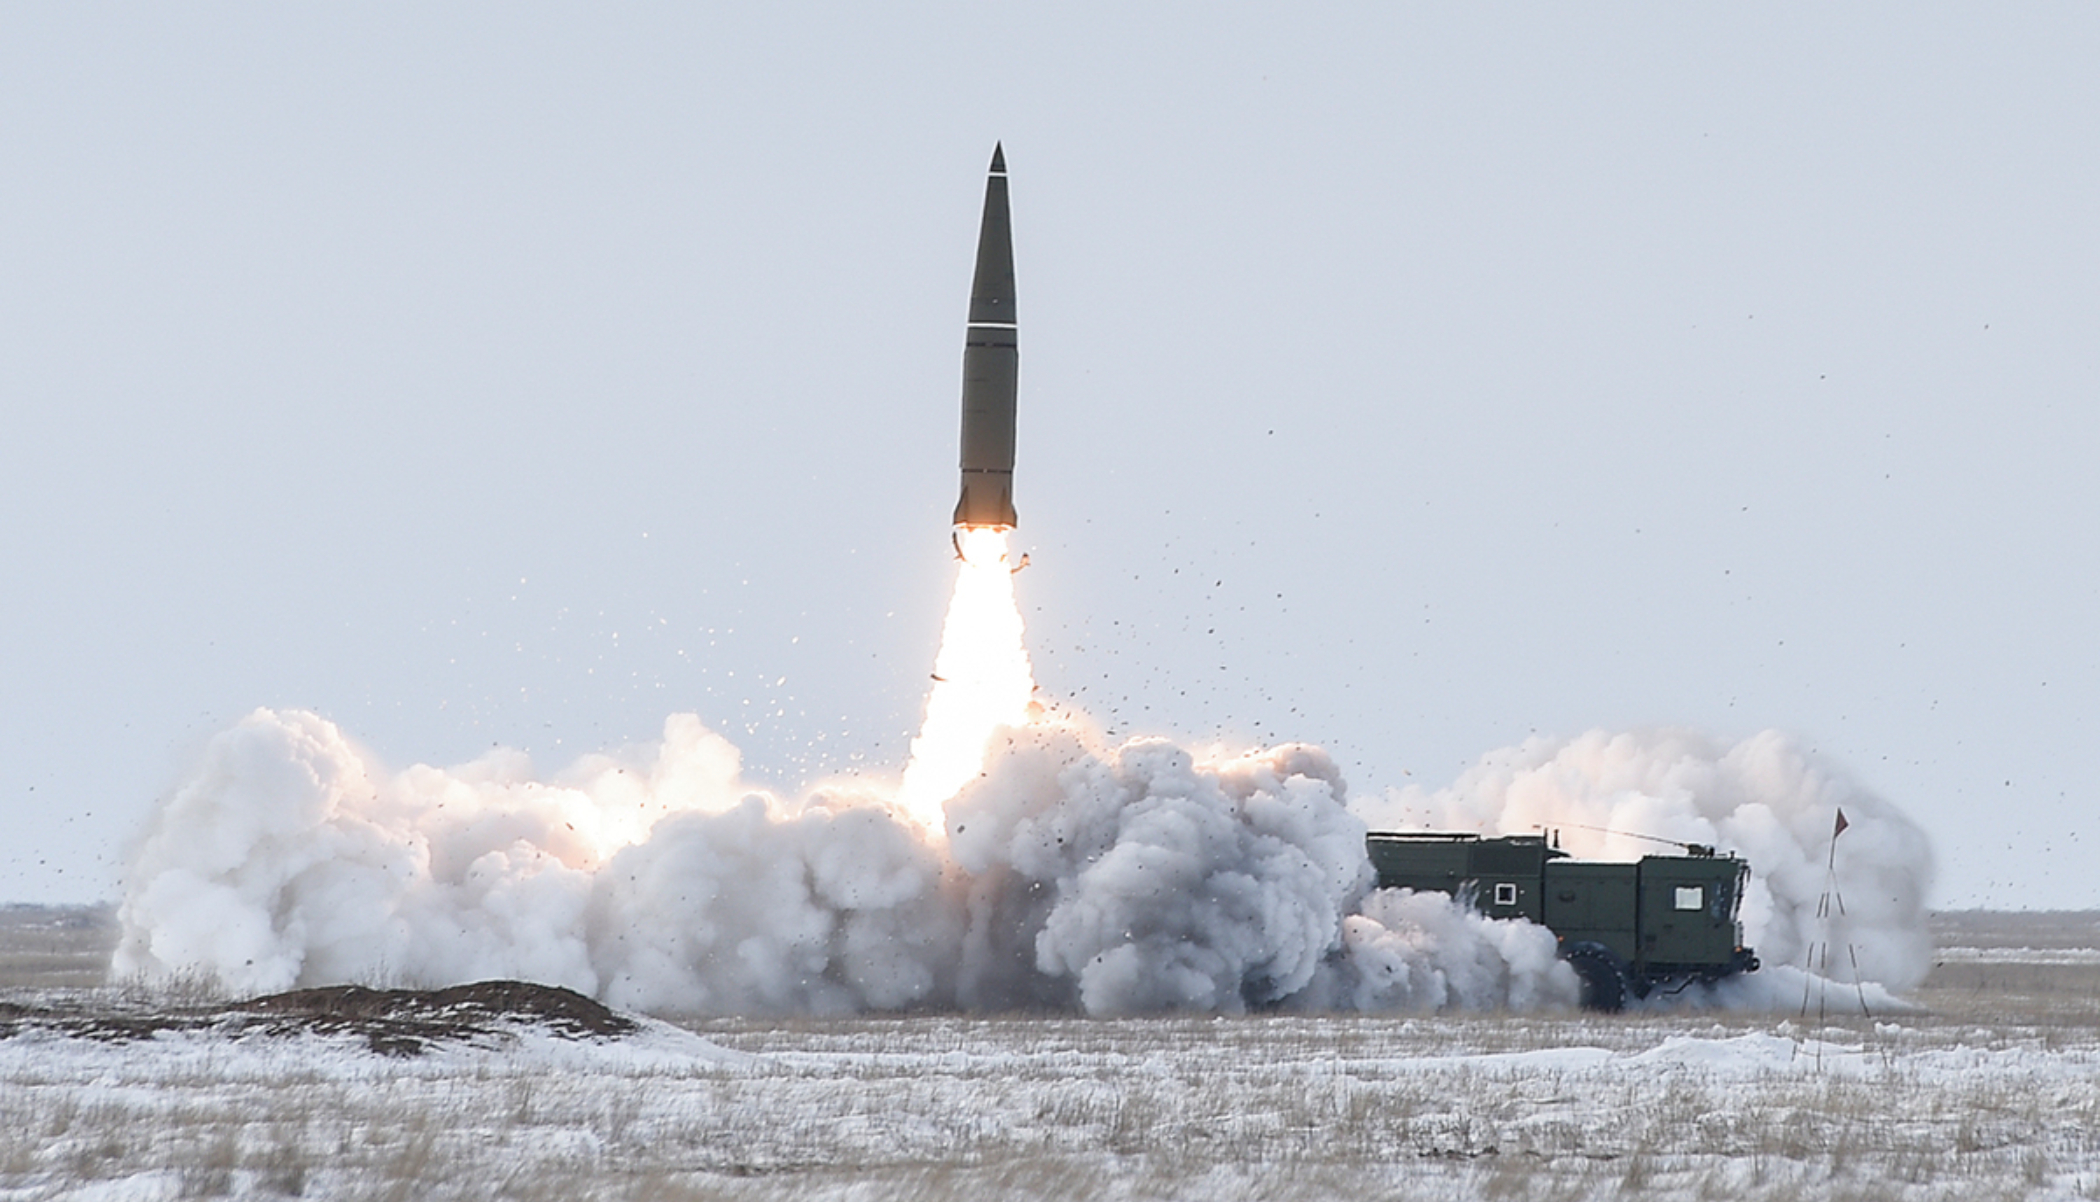 Practice launch of Russia's Iskander 500 km range missile, 2 March 2018. Photo: Russian Ministry of Defense, mil.ru.